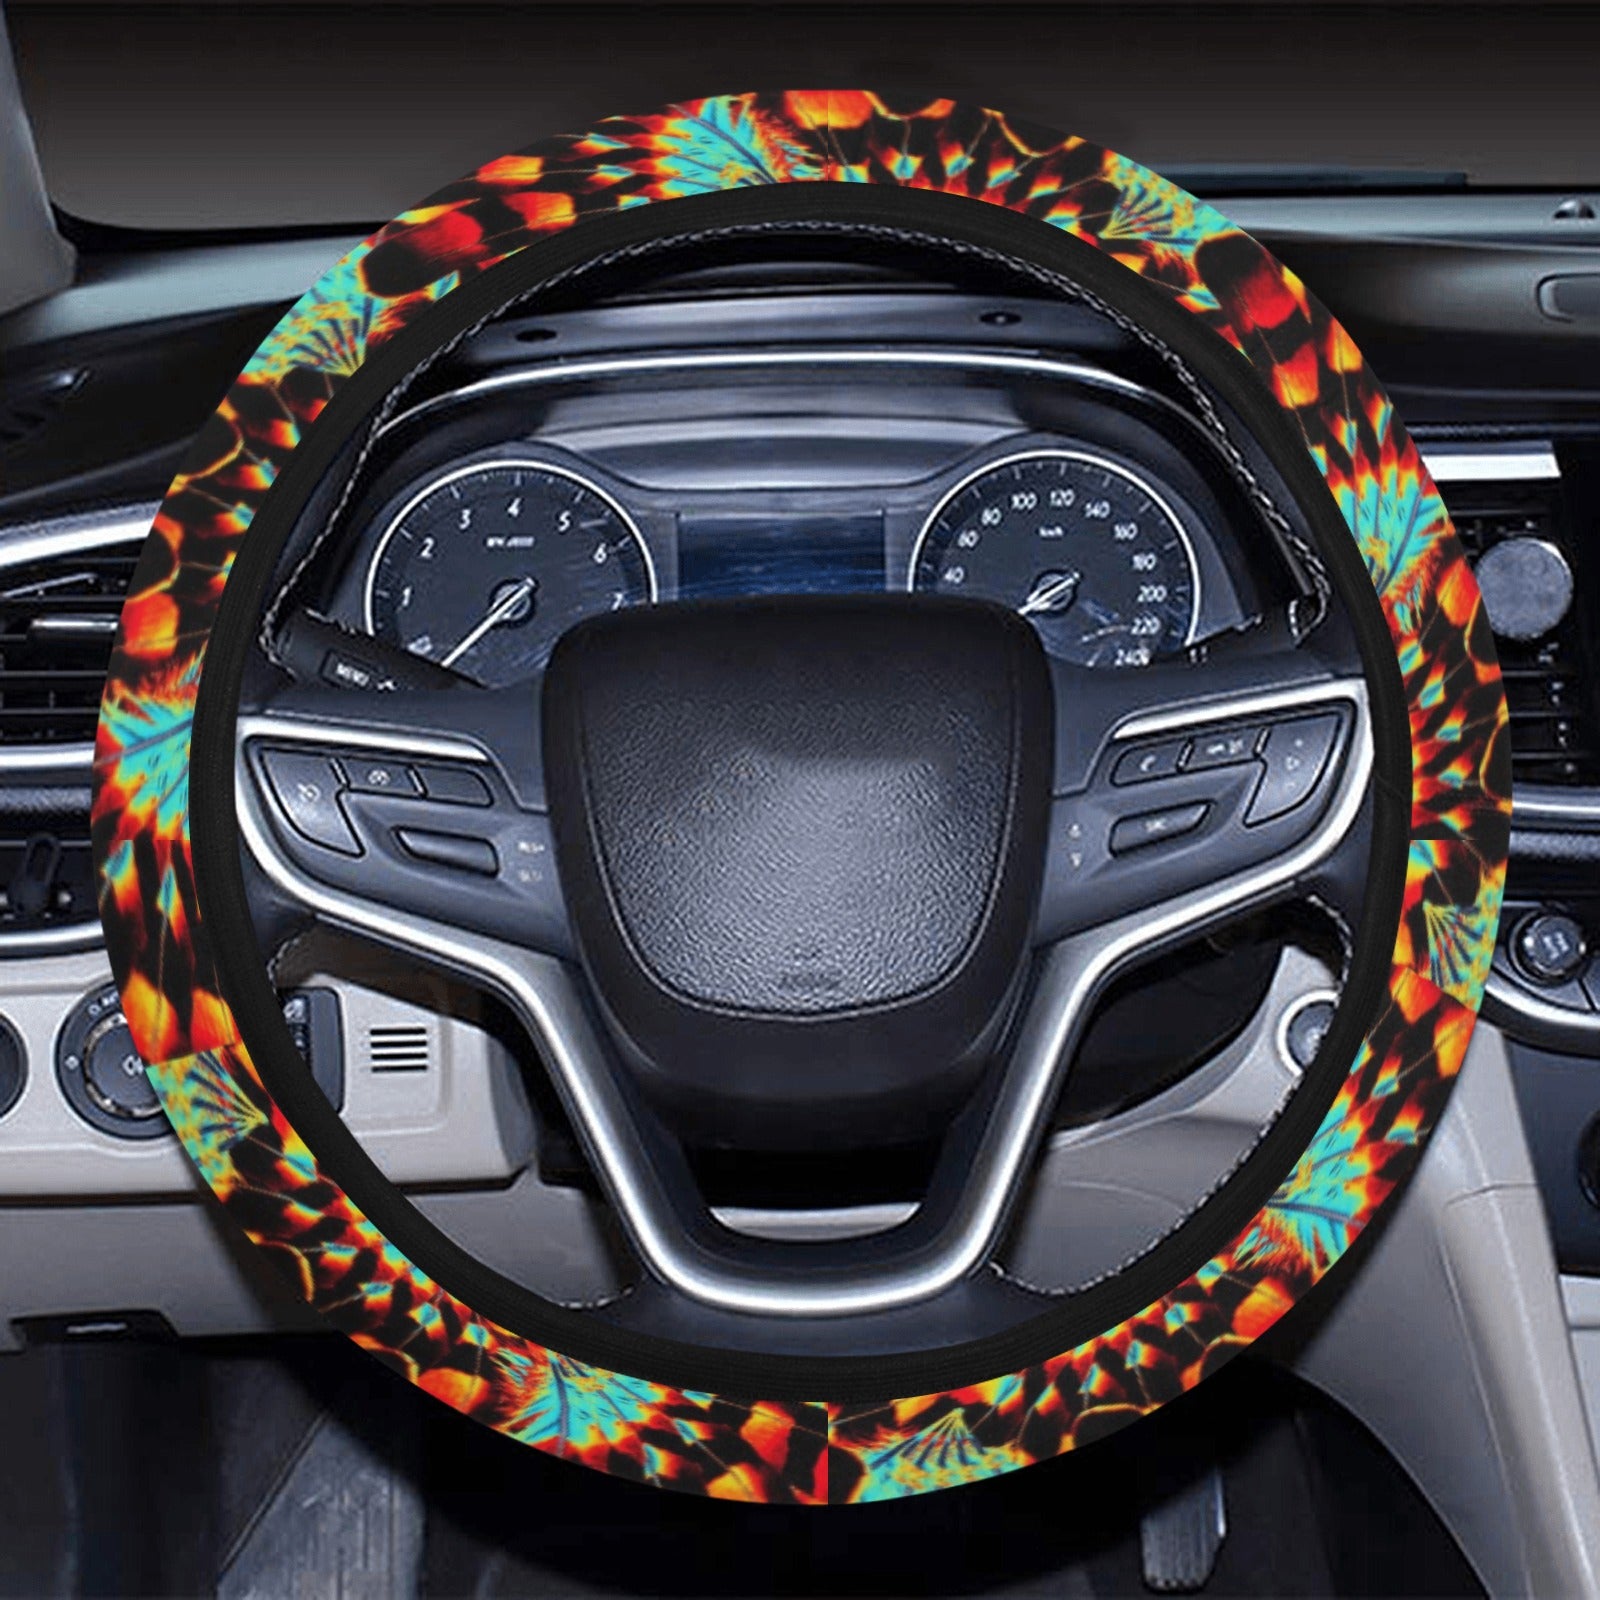 Hawk Feathers Fire and Turquoise Steering Wheel Cover with Elastic Edge